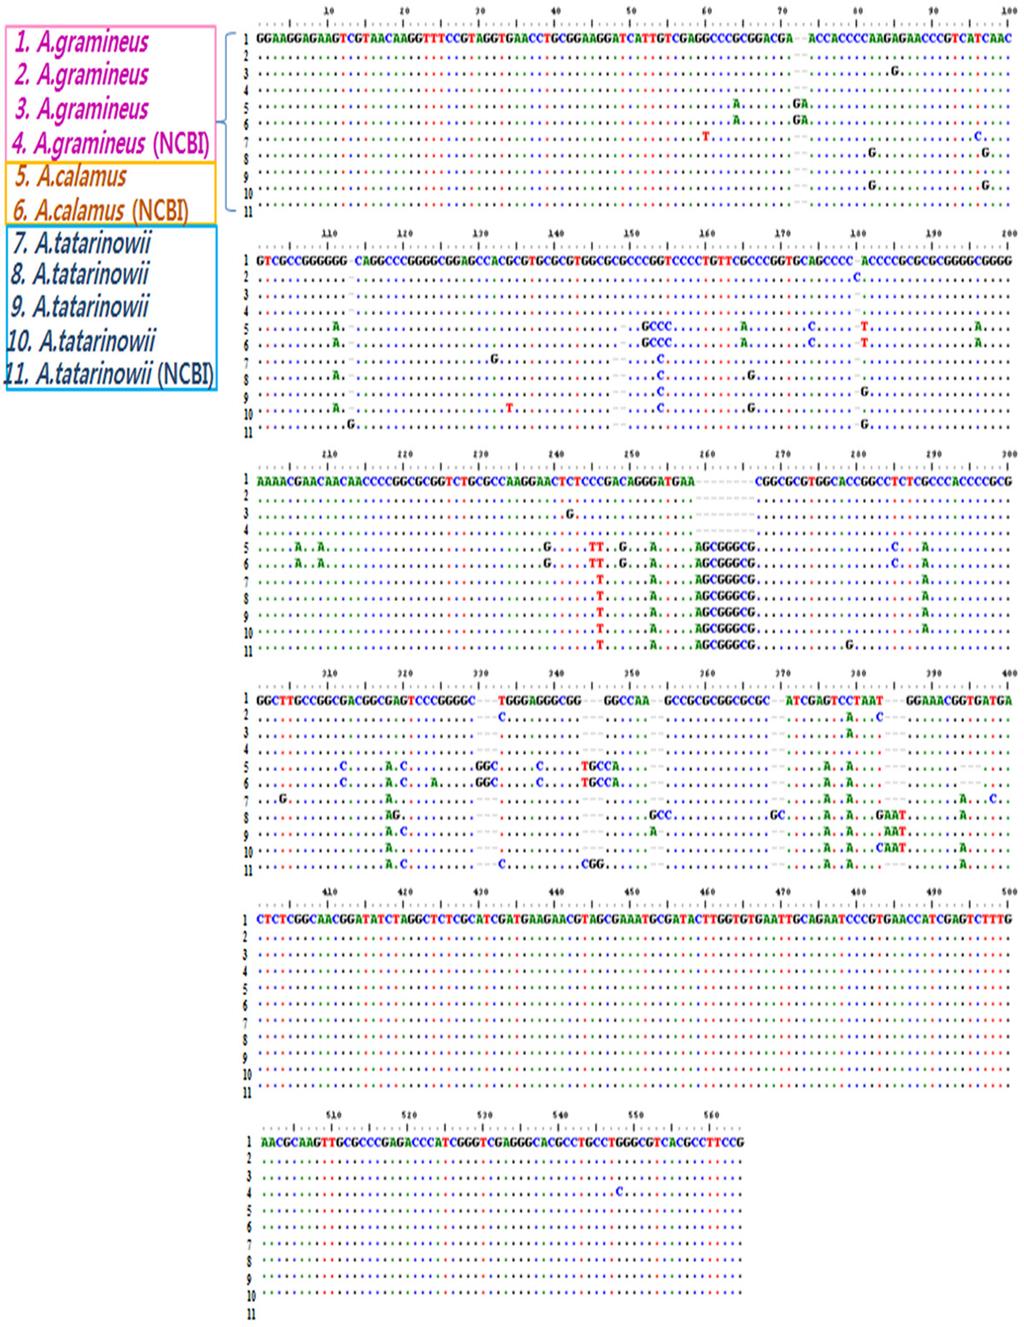 Figure 1. Partial ITS gene sequence alignment for Acorus gramineus, A. calamus, and A. tatarinowii compared with sequences from the NCBI database.